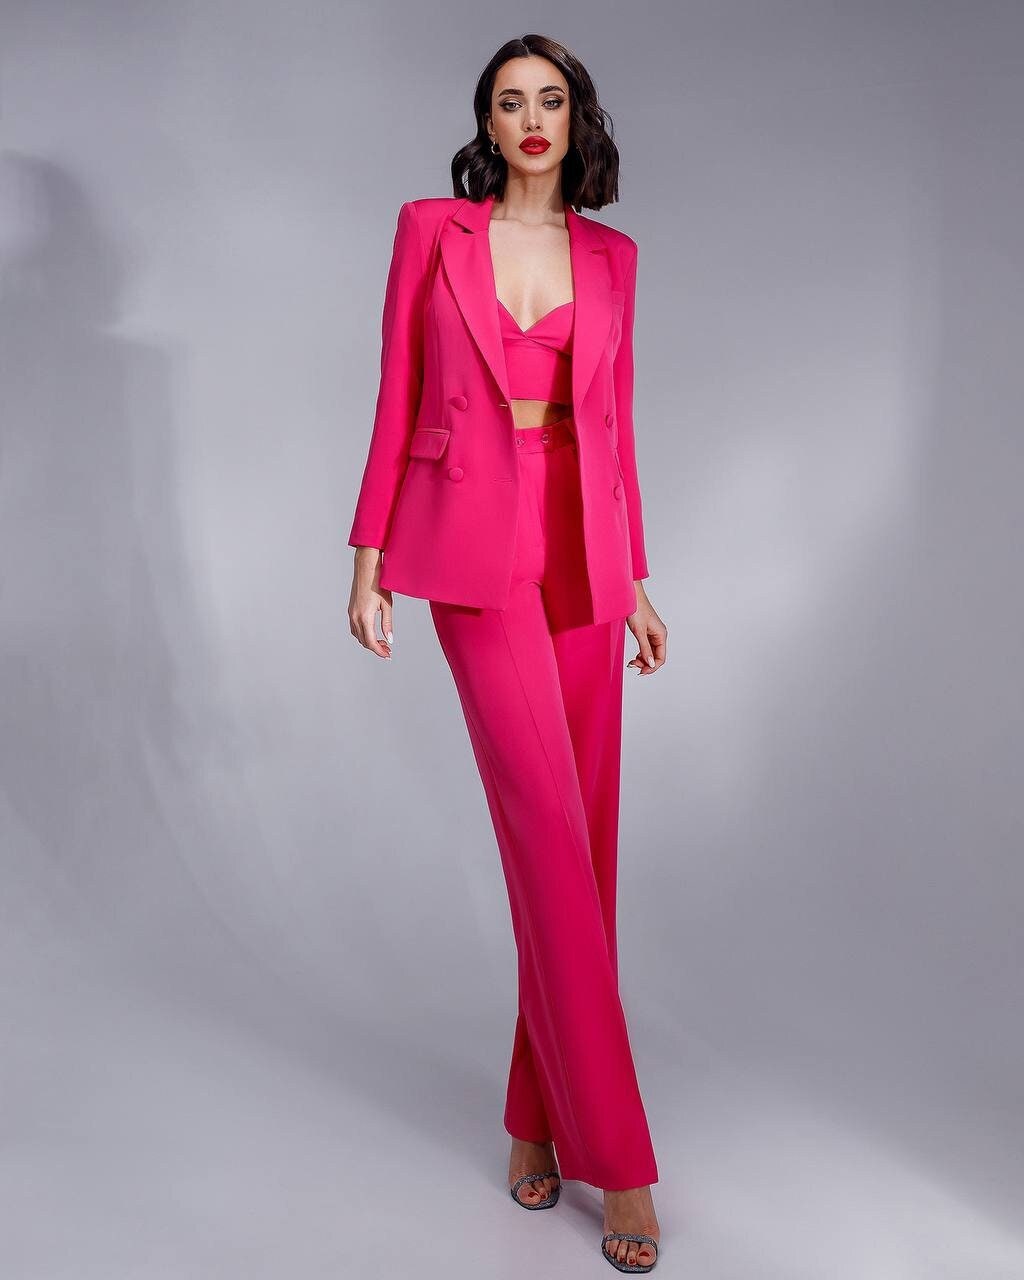 Two Piece Women Suit, Pink Office Suit With Blazer, Women Costume